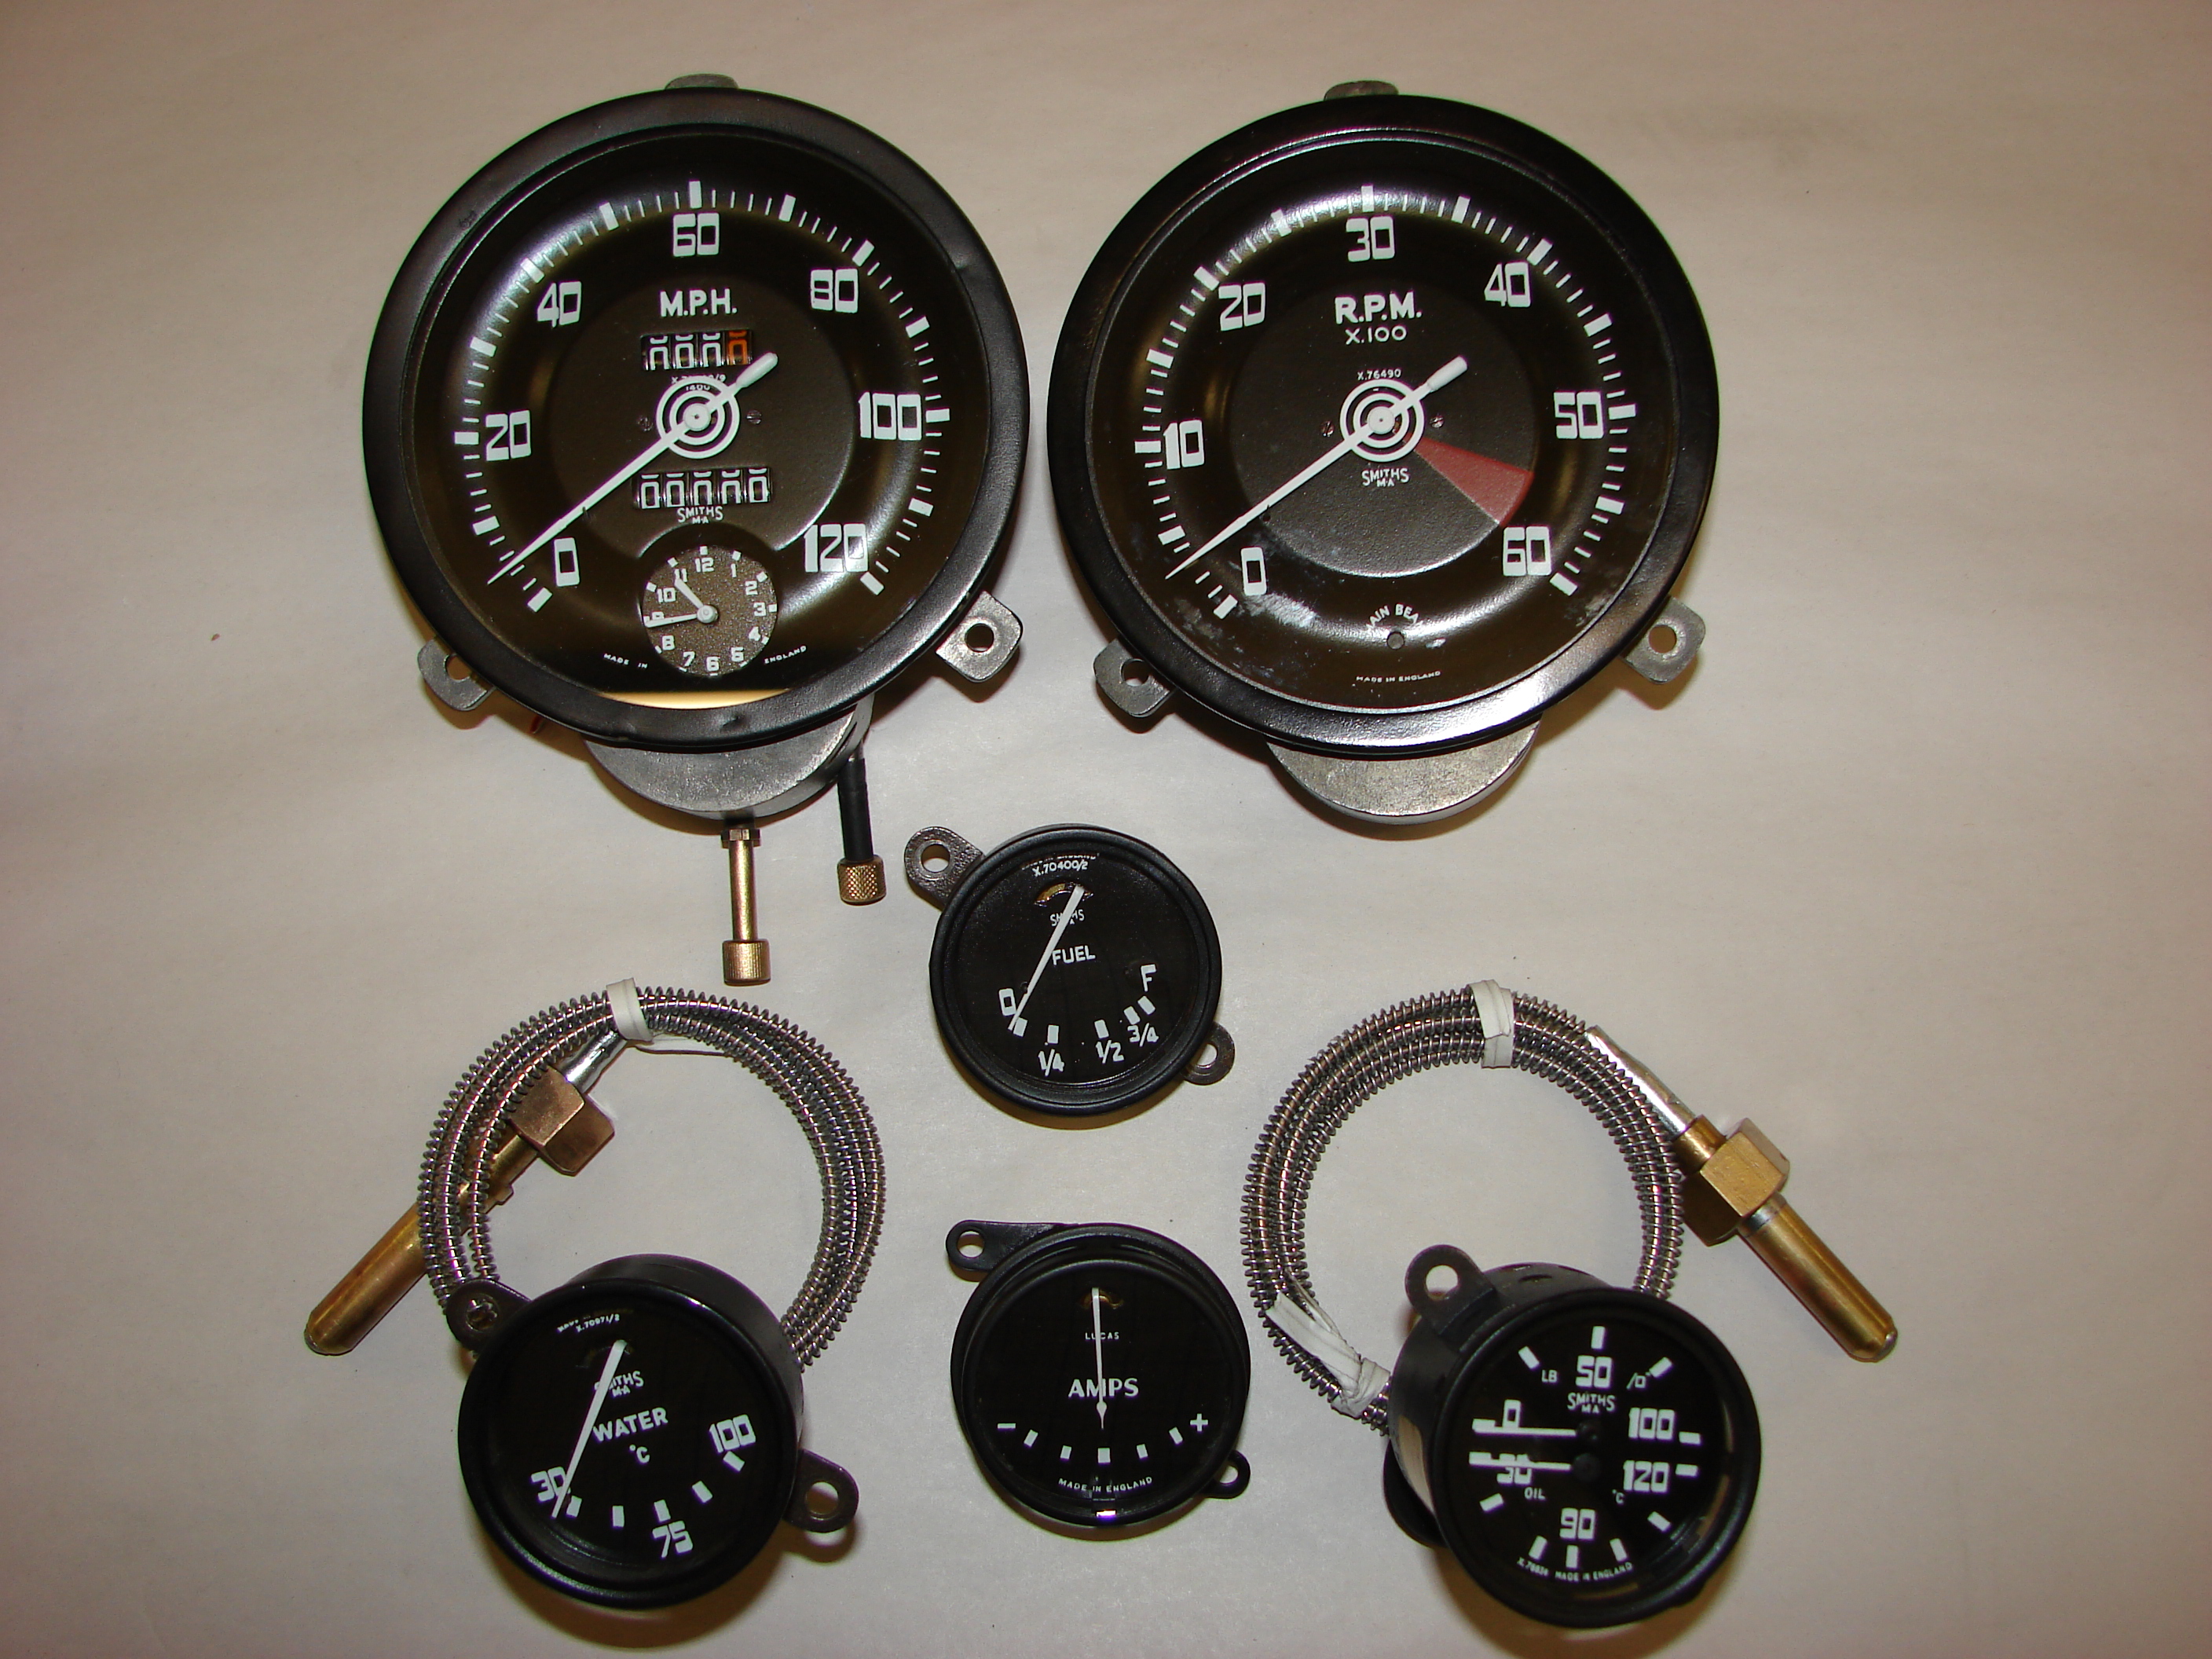 Freshly cleaned and polished vehicle speedometers